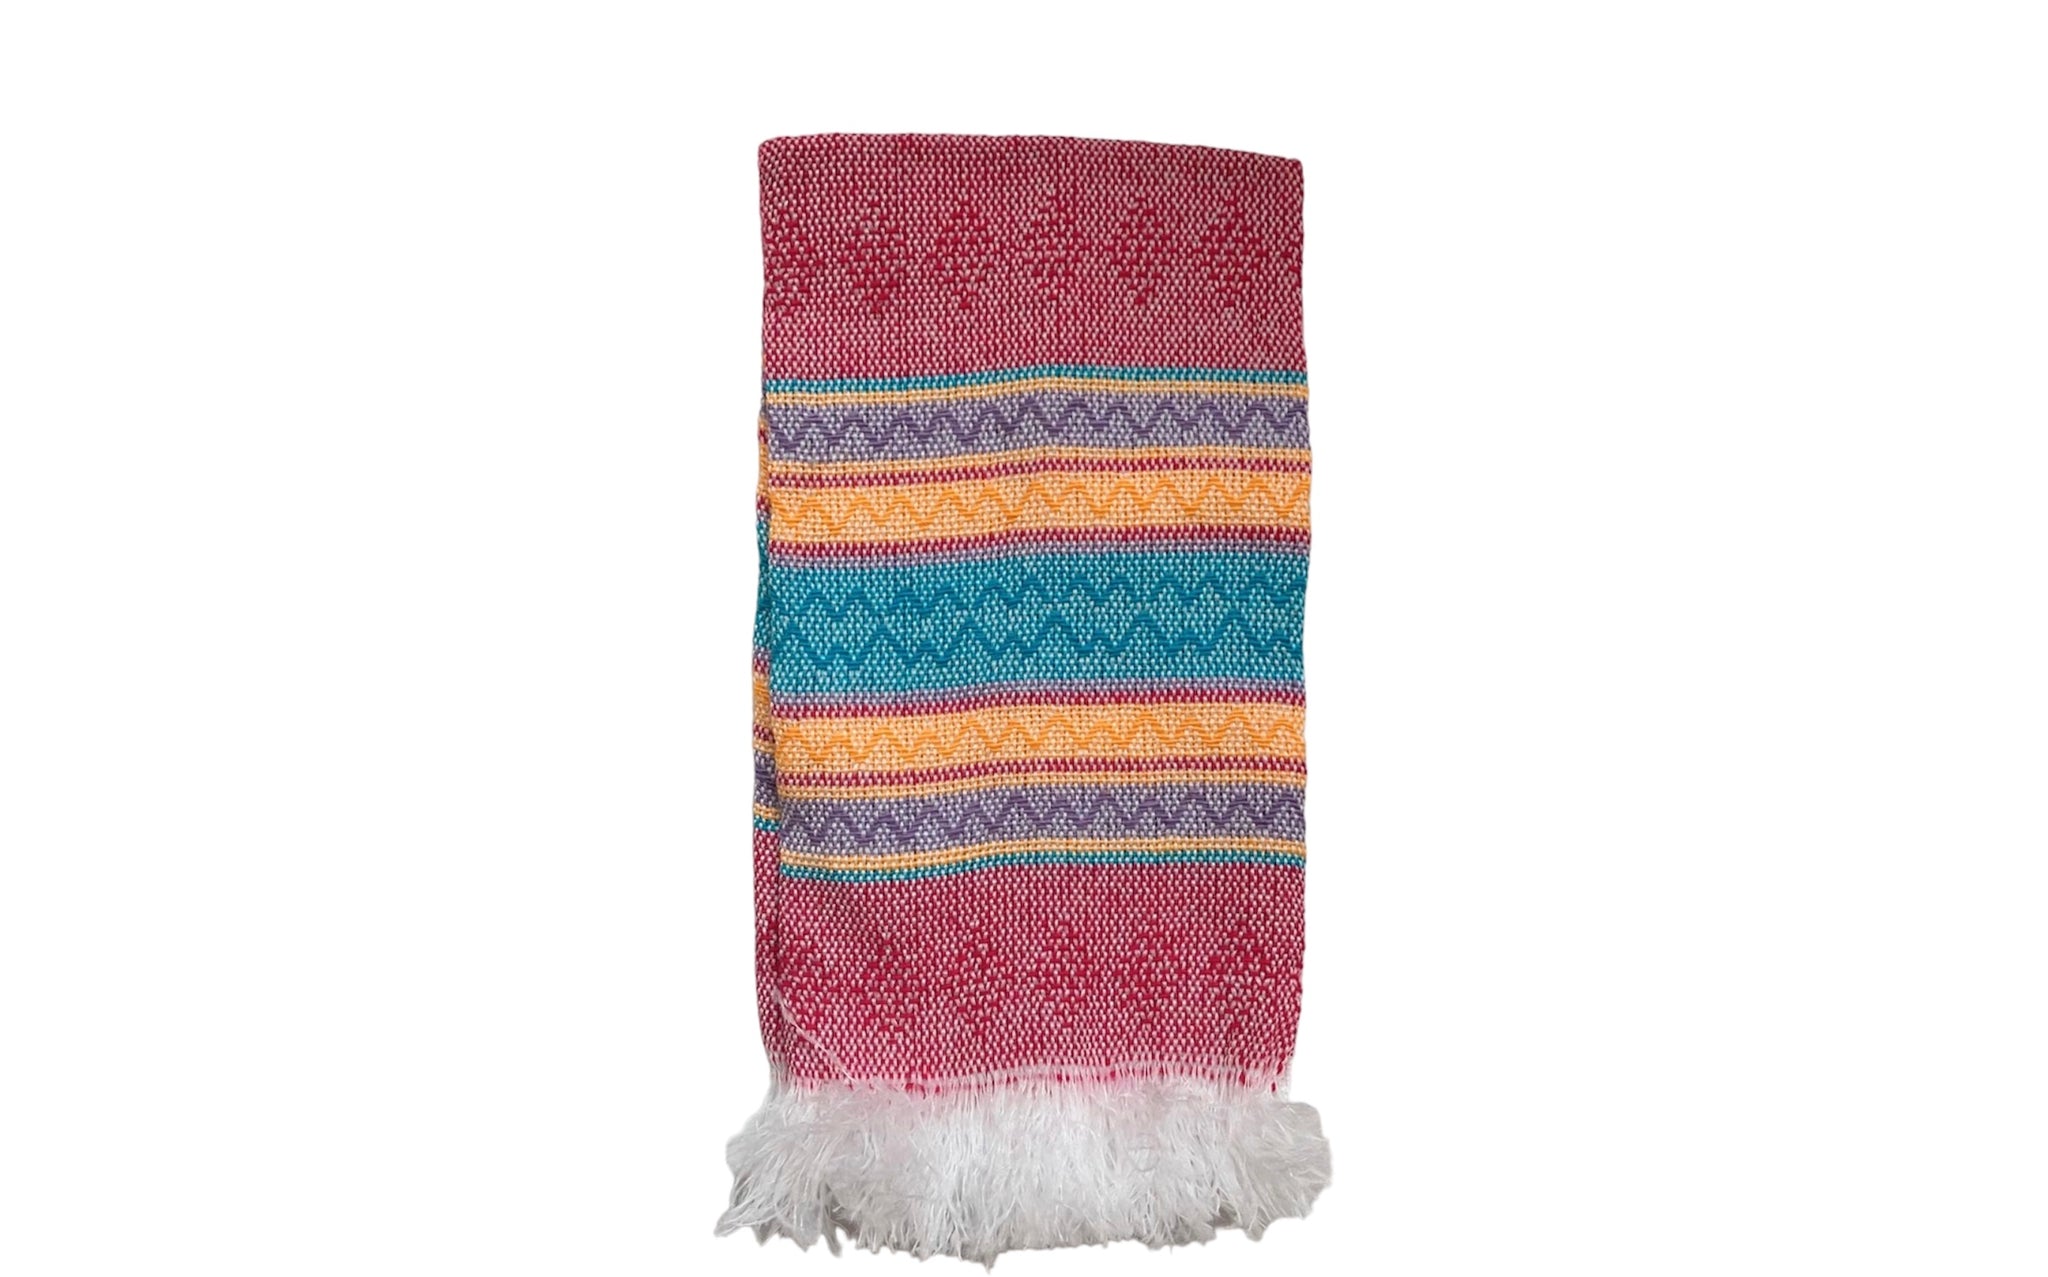 Small Mexican Towel 17x6 in | Turkish Towel